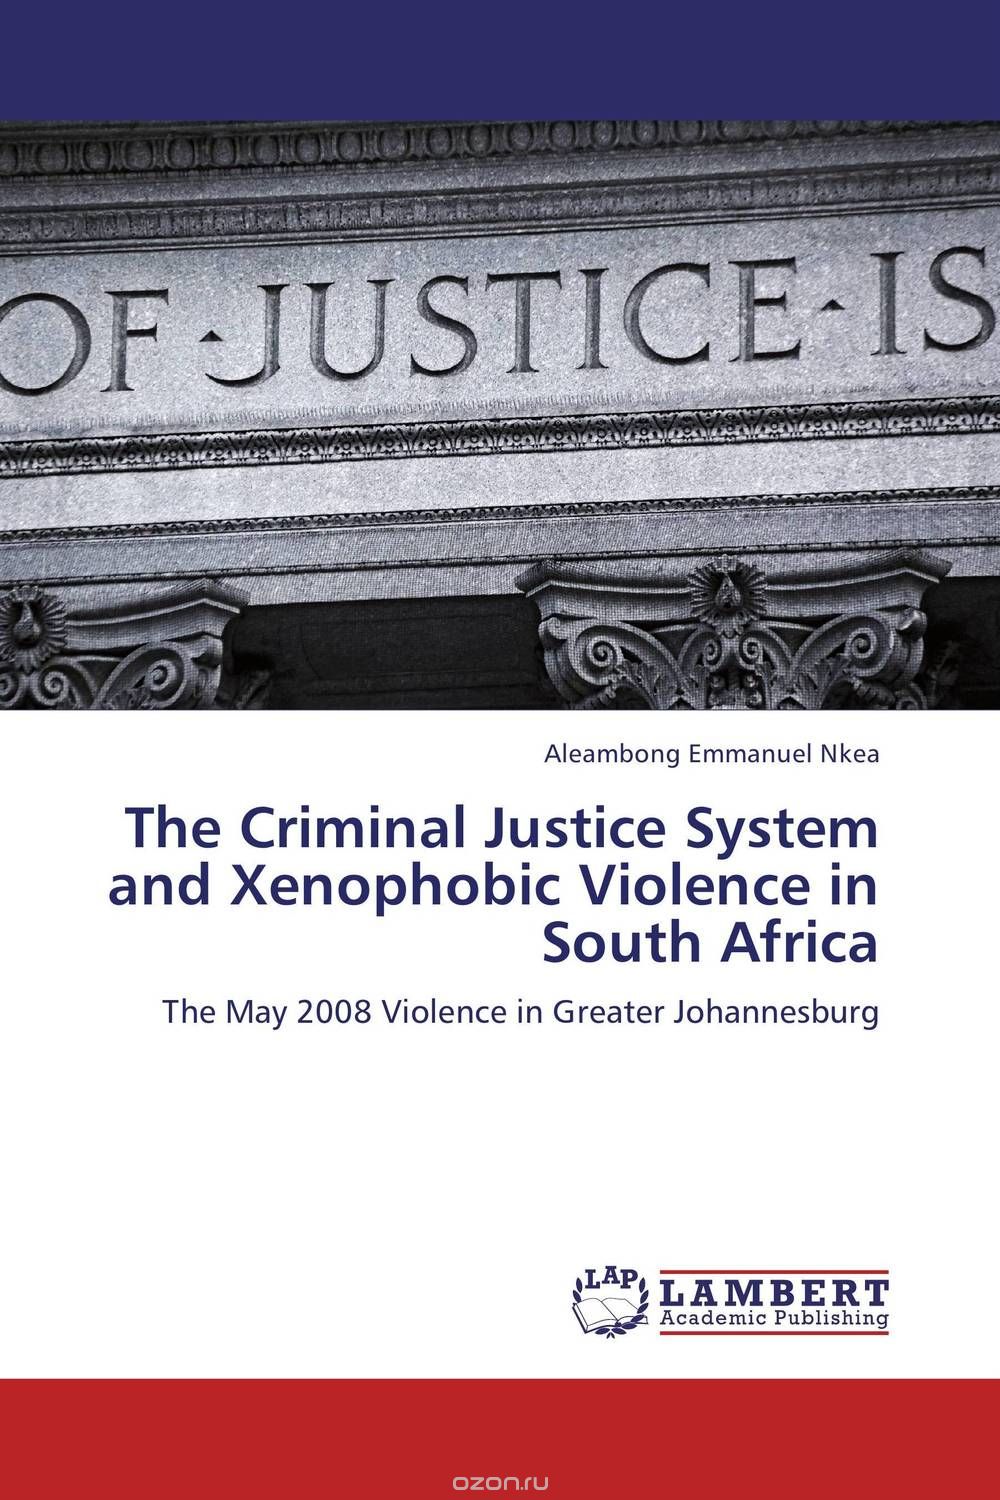 Скачать книгу "The Criminal Justice System and Xenophobic Violence in South Africa"